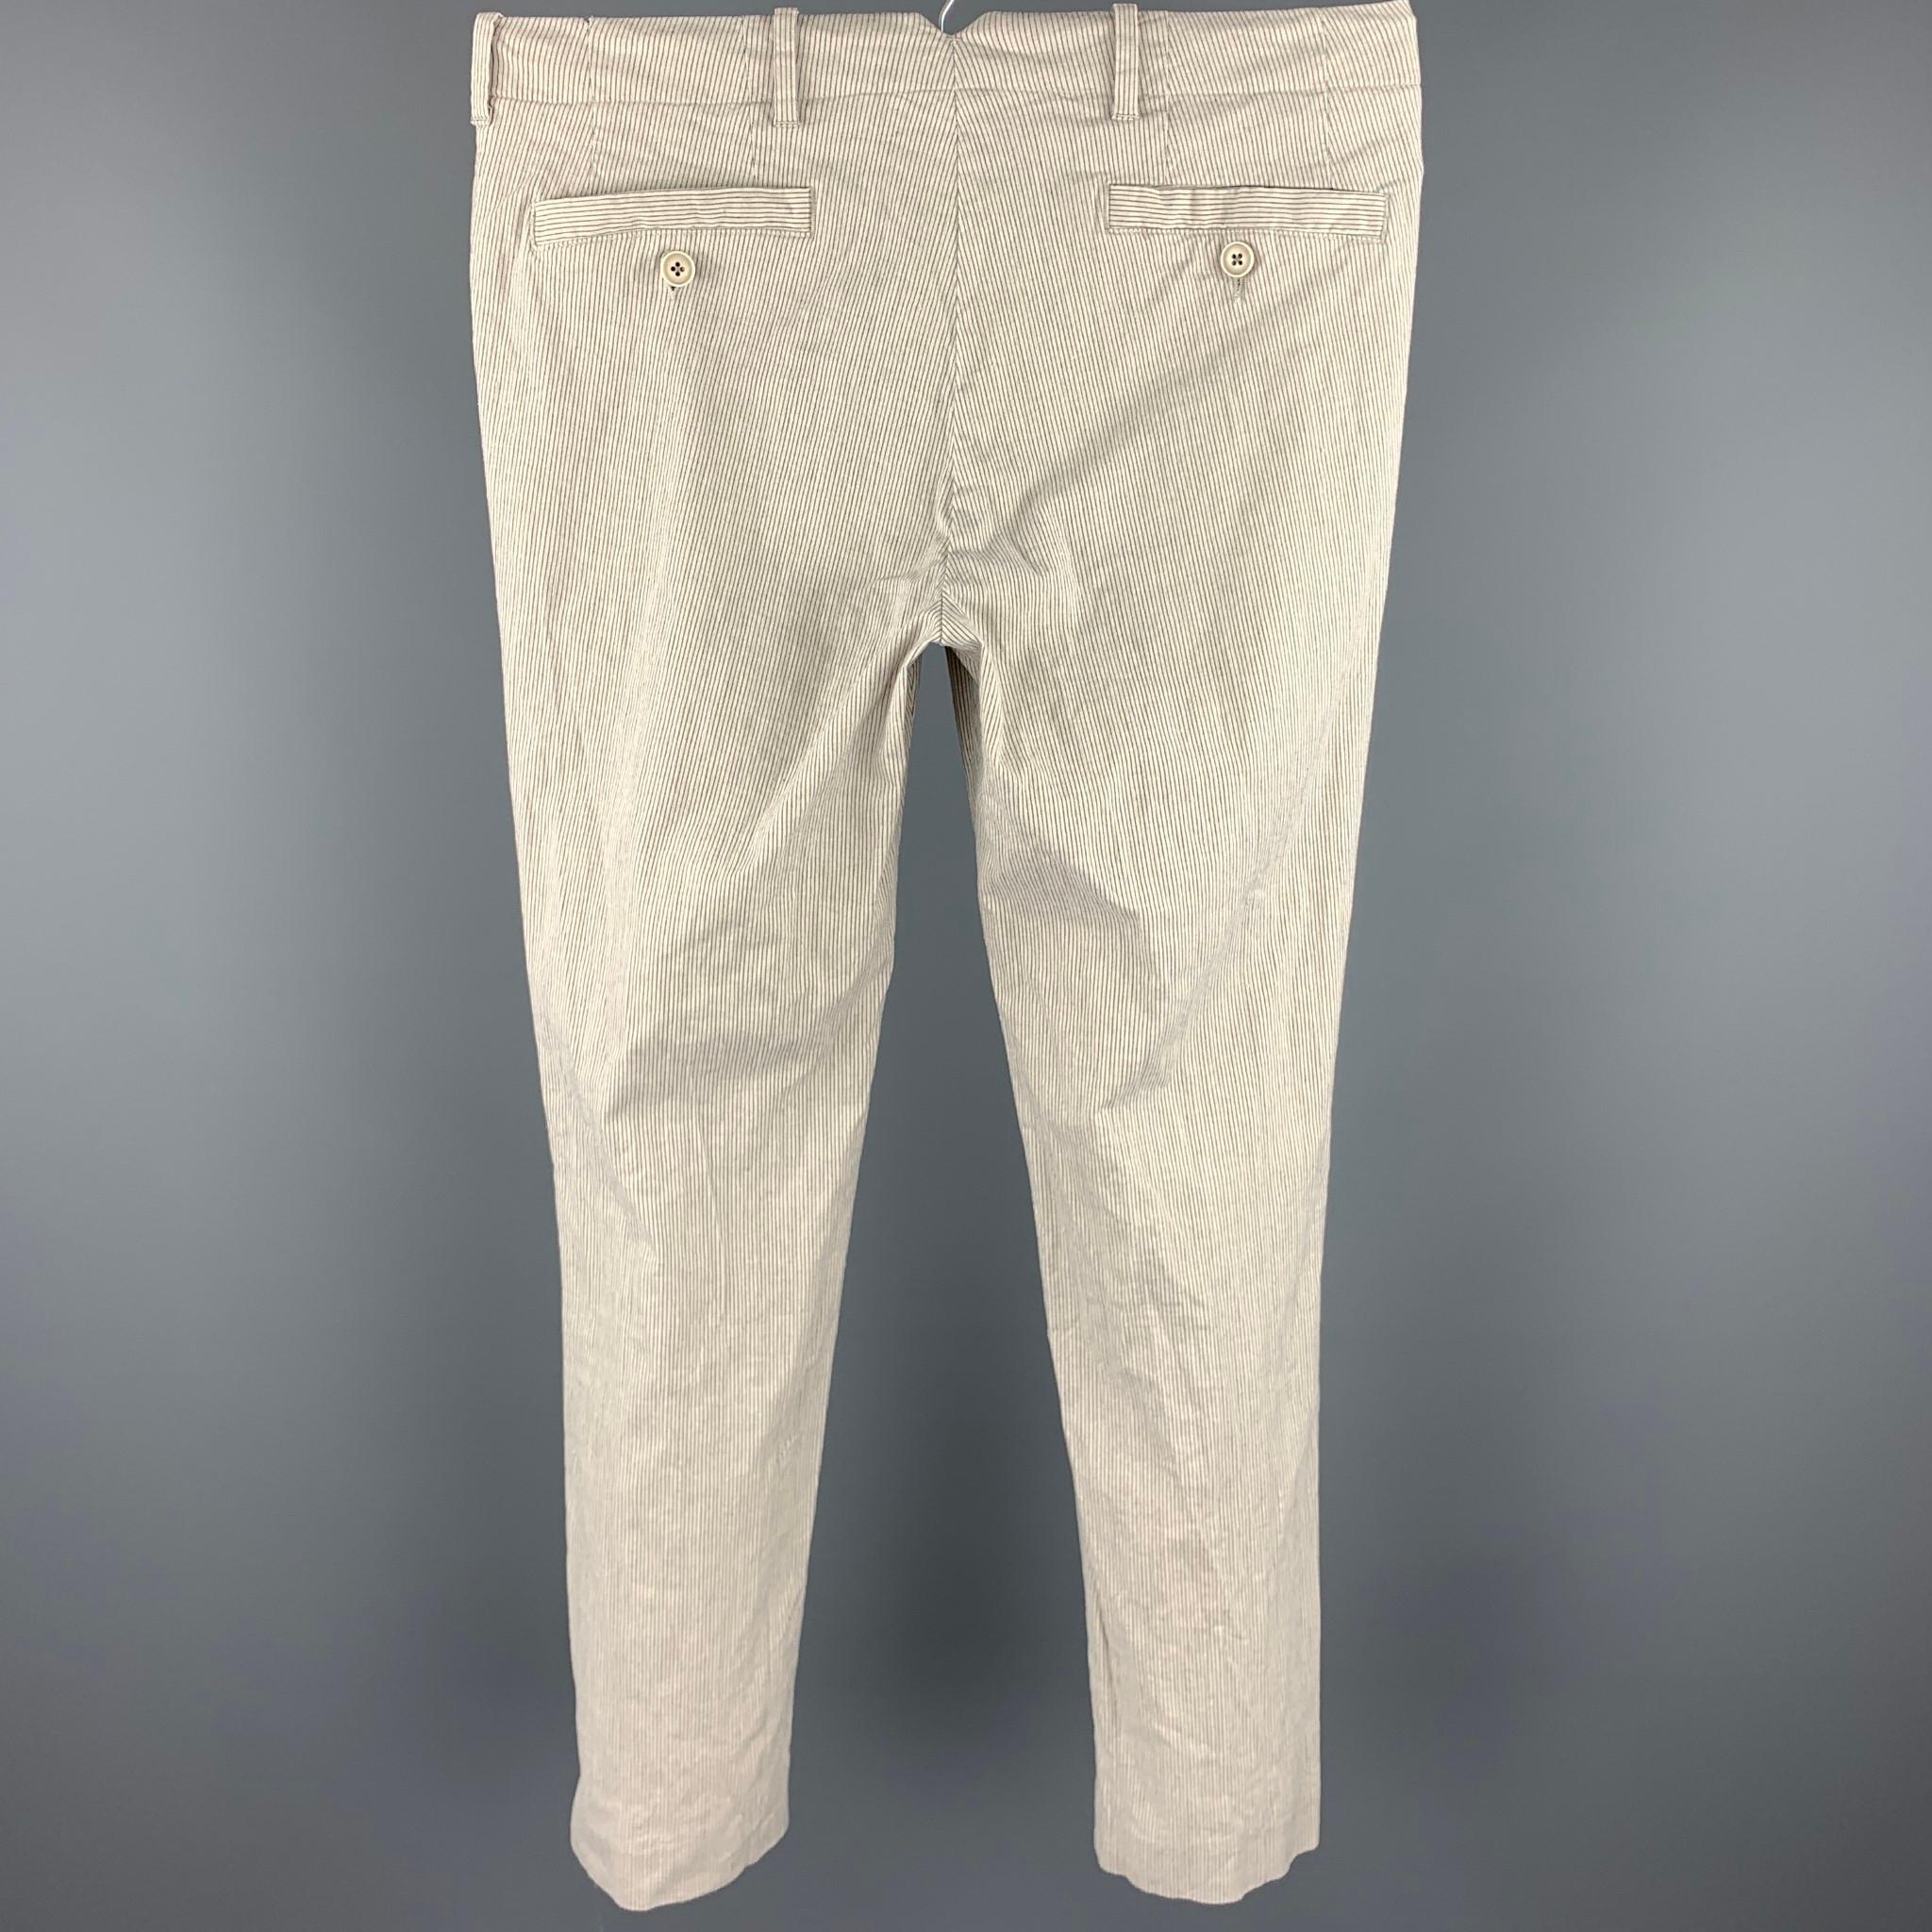 JOHN VARVATOS casual pants comes in a cream stripe cotton blend featuring a slim fit ad a zip fly closure. Made in Portugal. 

Good Pre-Owned Condition.
Marked: 44

Measurements:

Waist: 30 in. 
Rise: 8.5 in. 
Inseam: 28 in. 

SKU: 97685
Category: